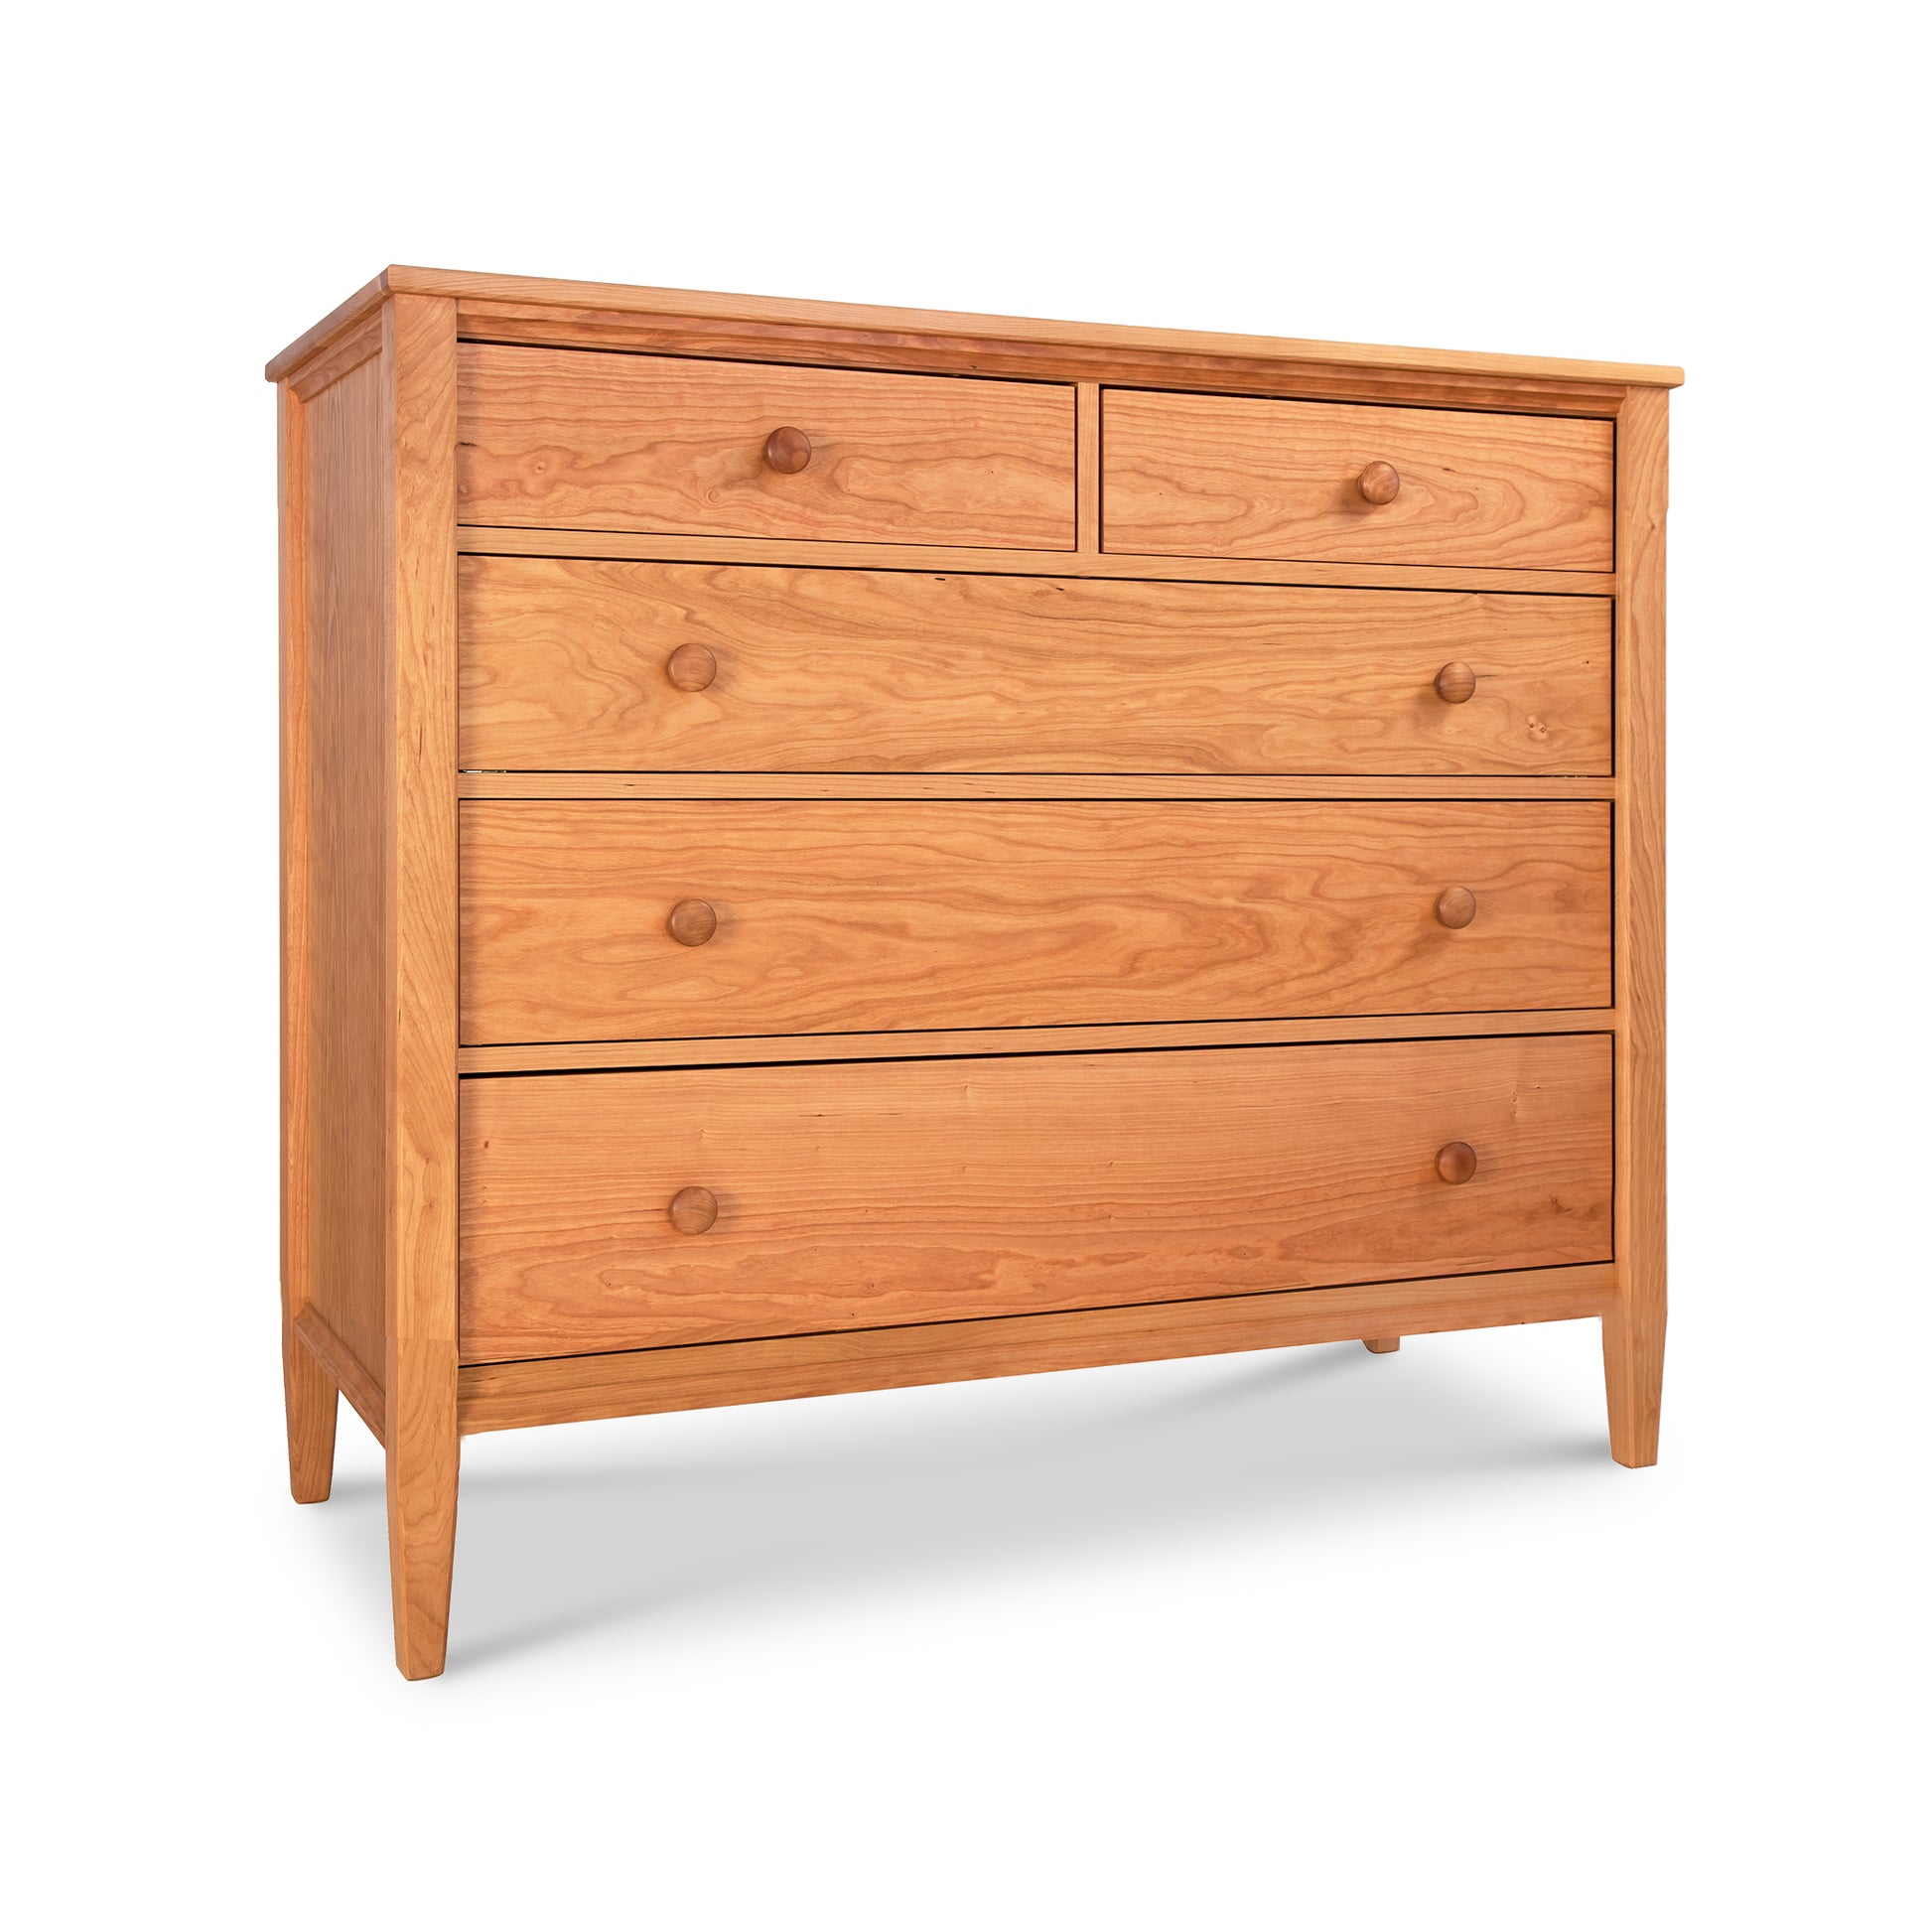 A Maple Corner Woodworks Vermont Shaker Extra Wide Chest with six drawers, featuring round knobs and a smooth finish, crafted from natural cherry hardwood, isolated on a white background.